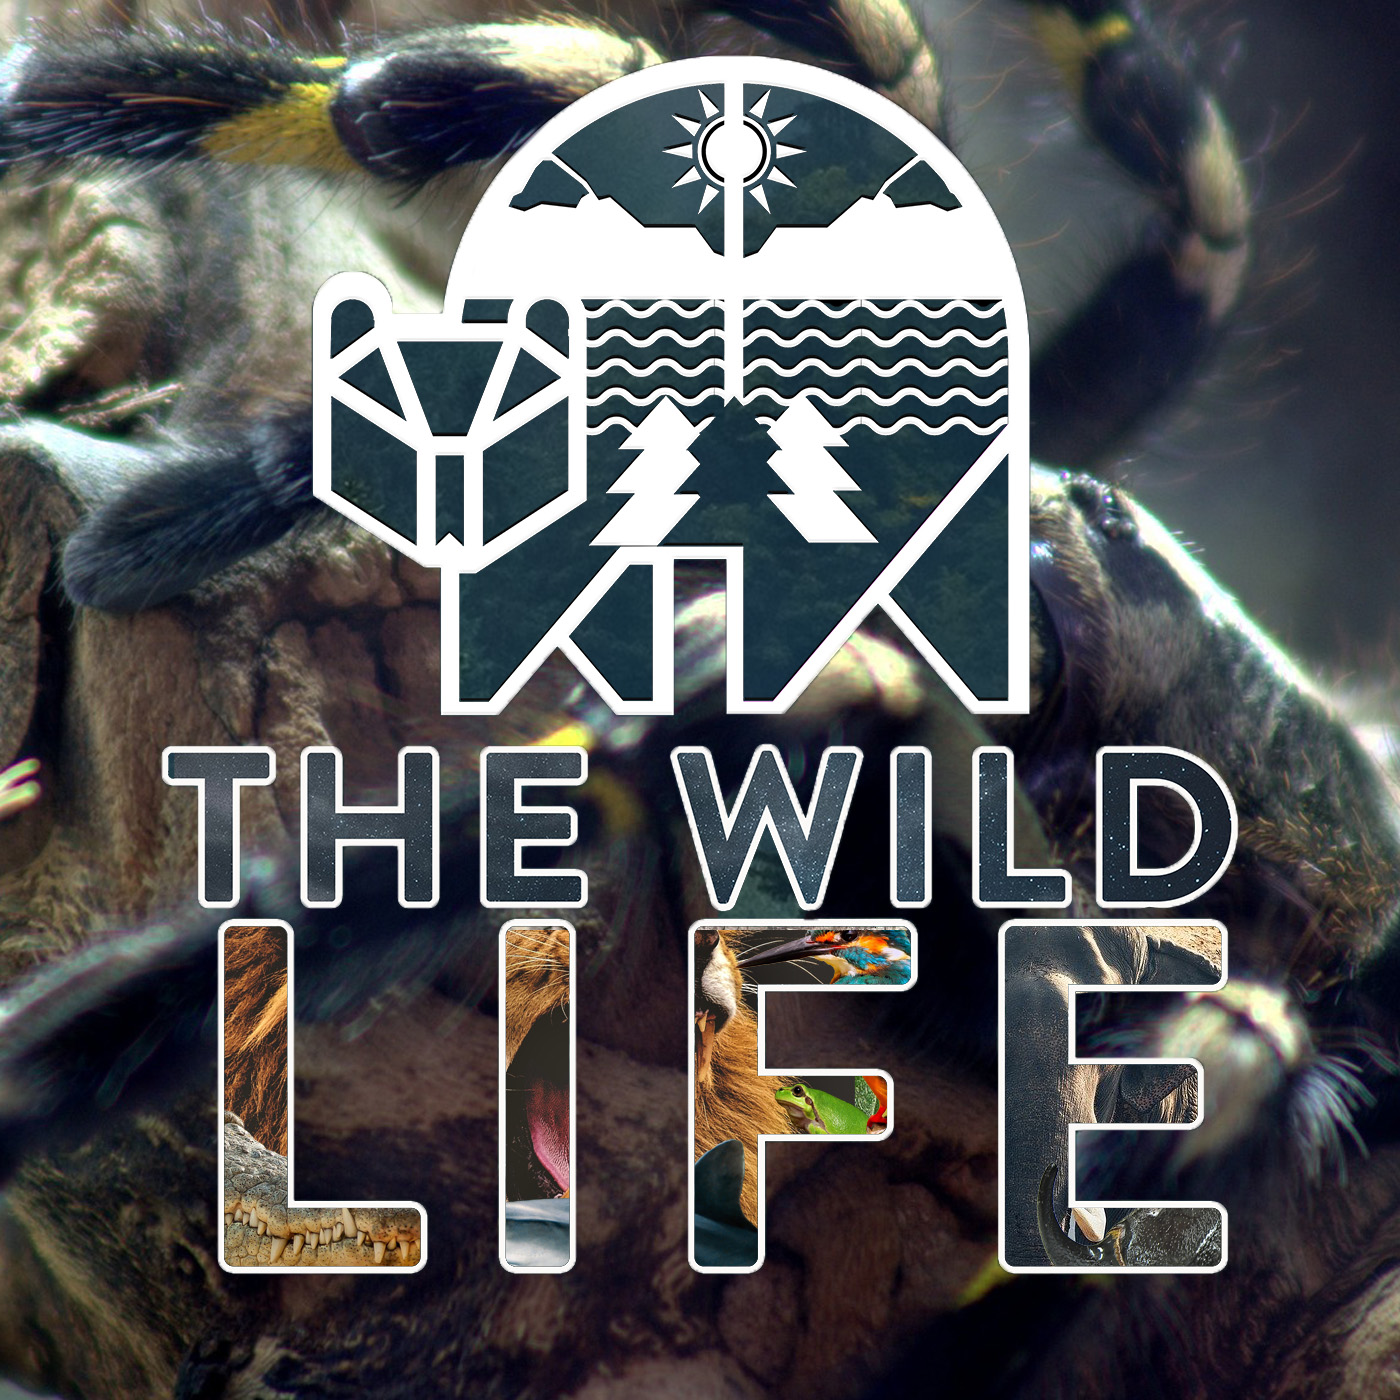 Artwork for podcast The Wild Life